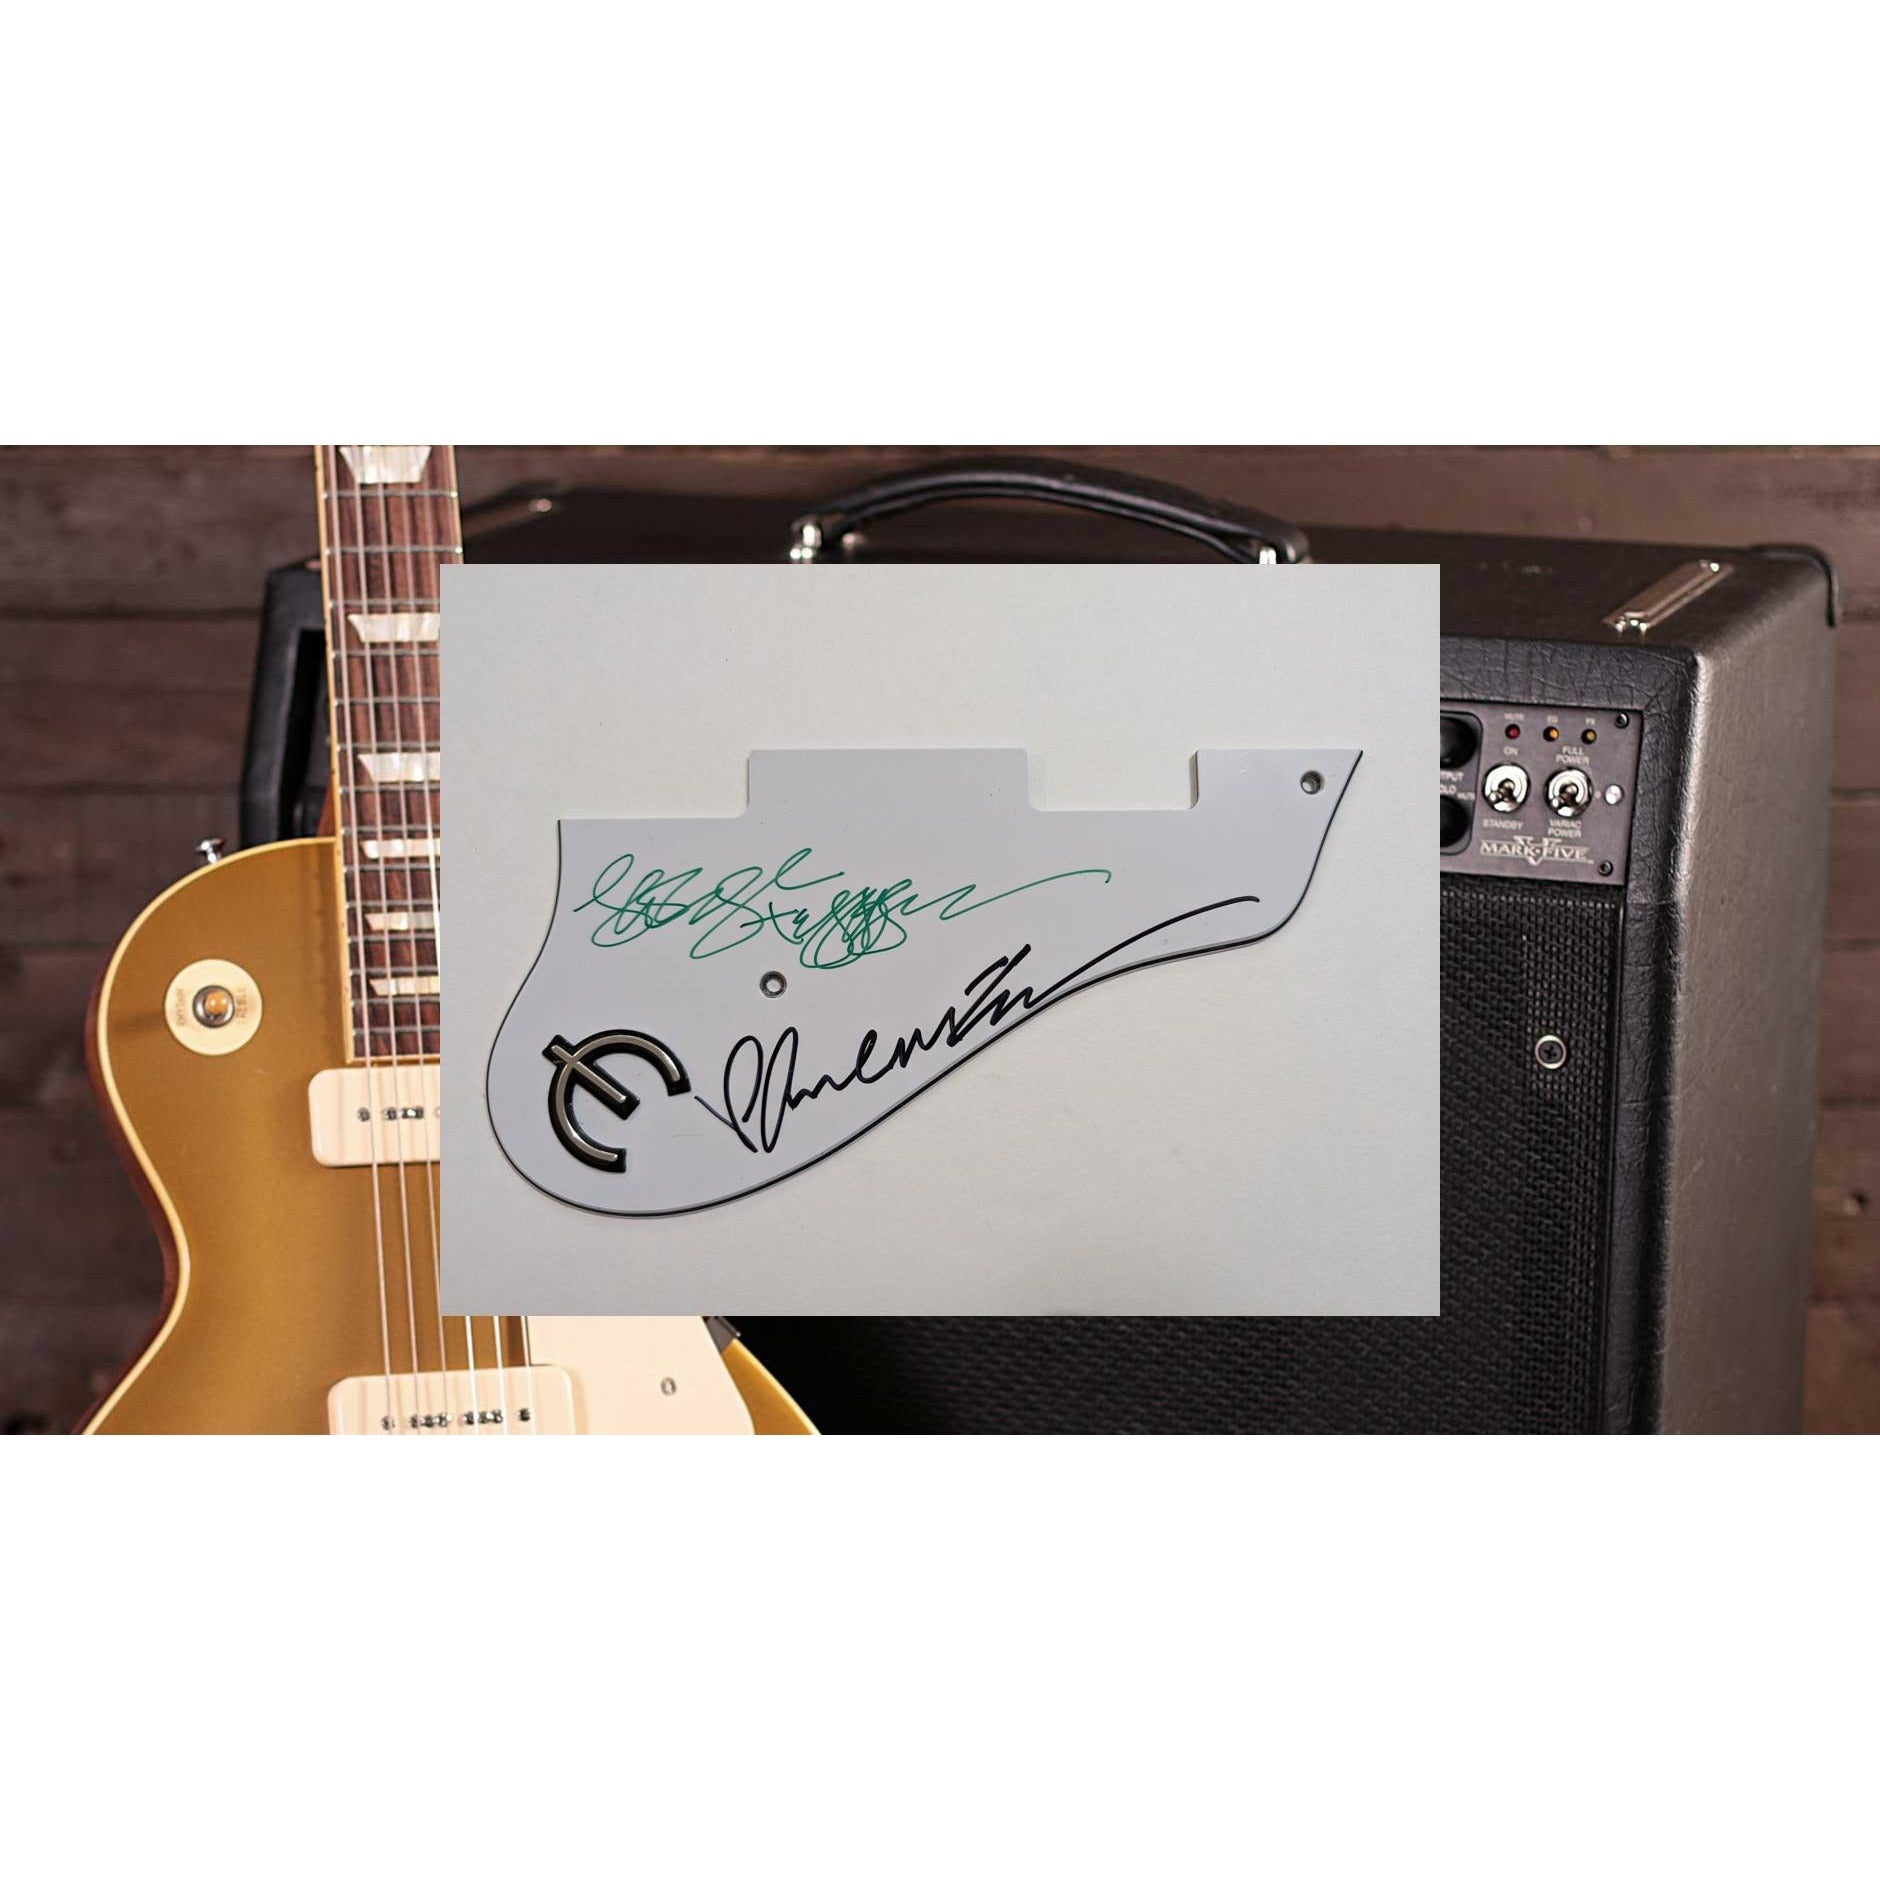 George Harrison and Paul McCartney Epiphone Gibson electric guitar pickguard signed with proof